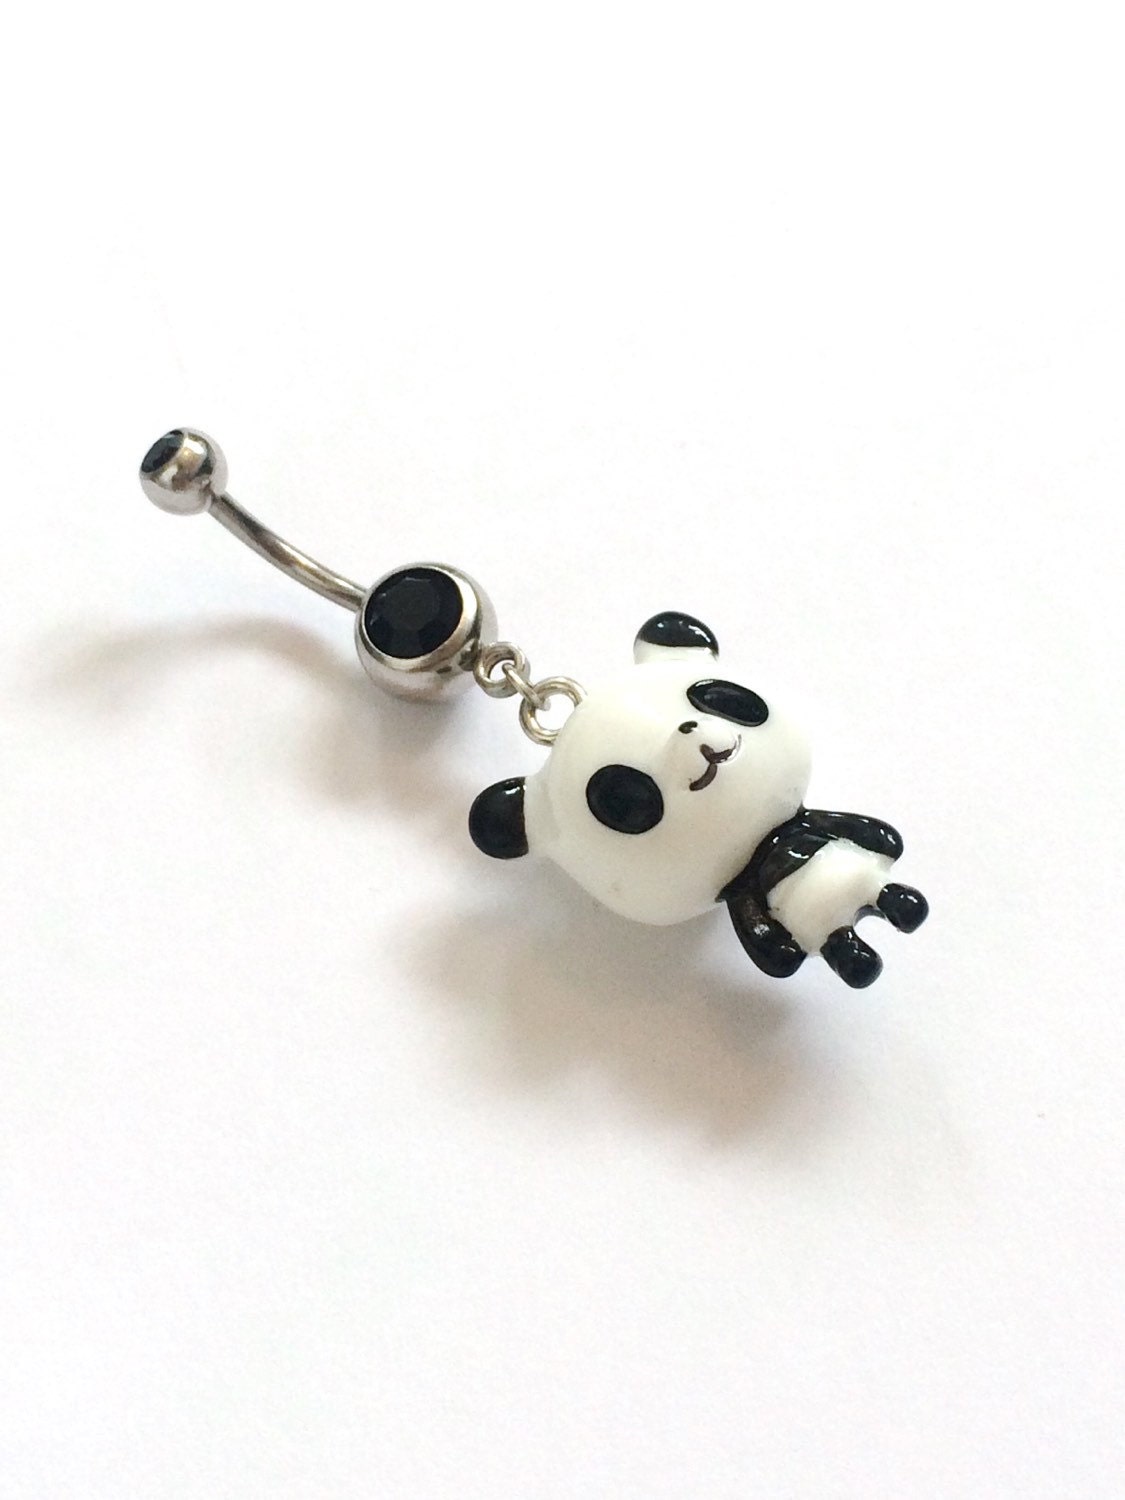 SALE Belly button ring belly bar 14g silver belly ring